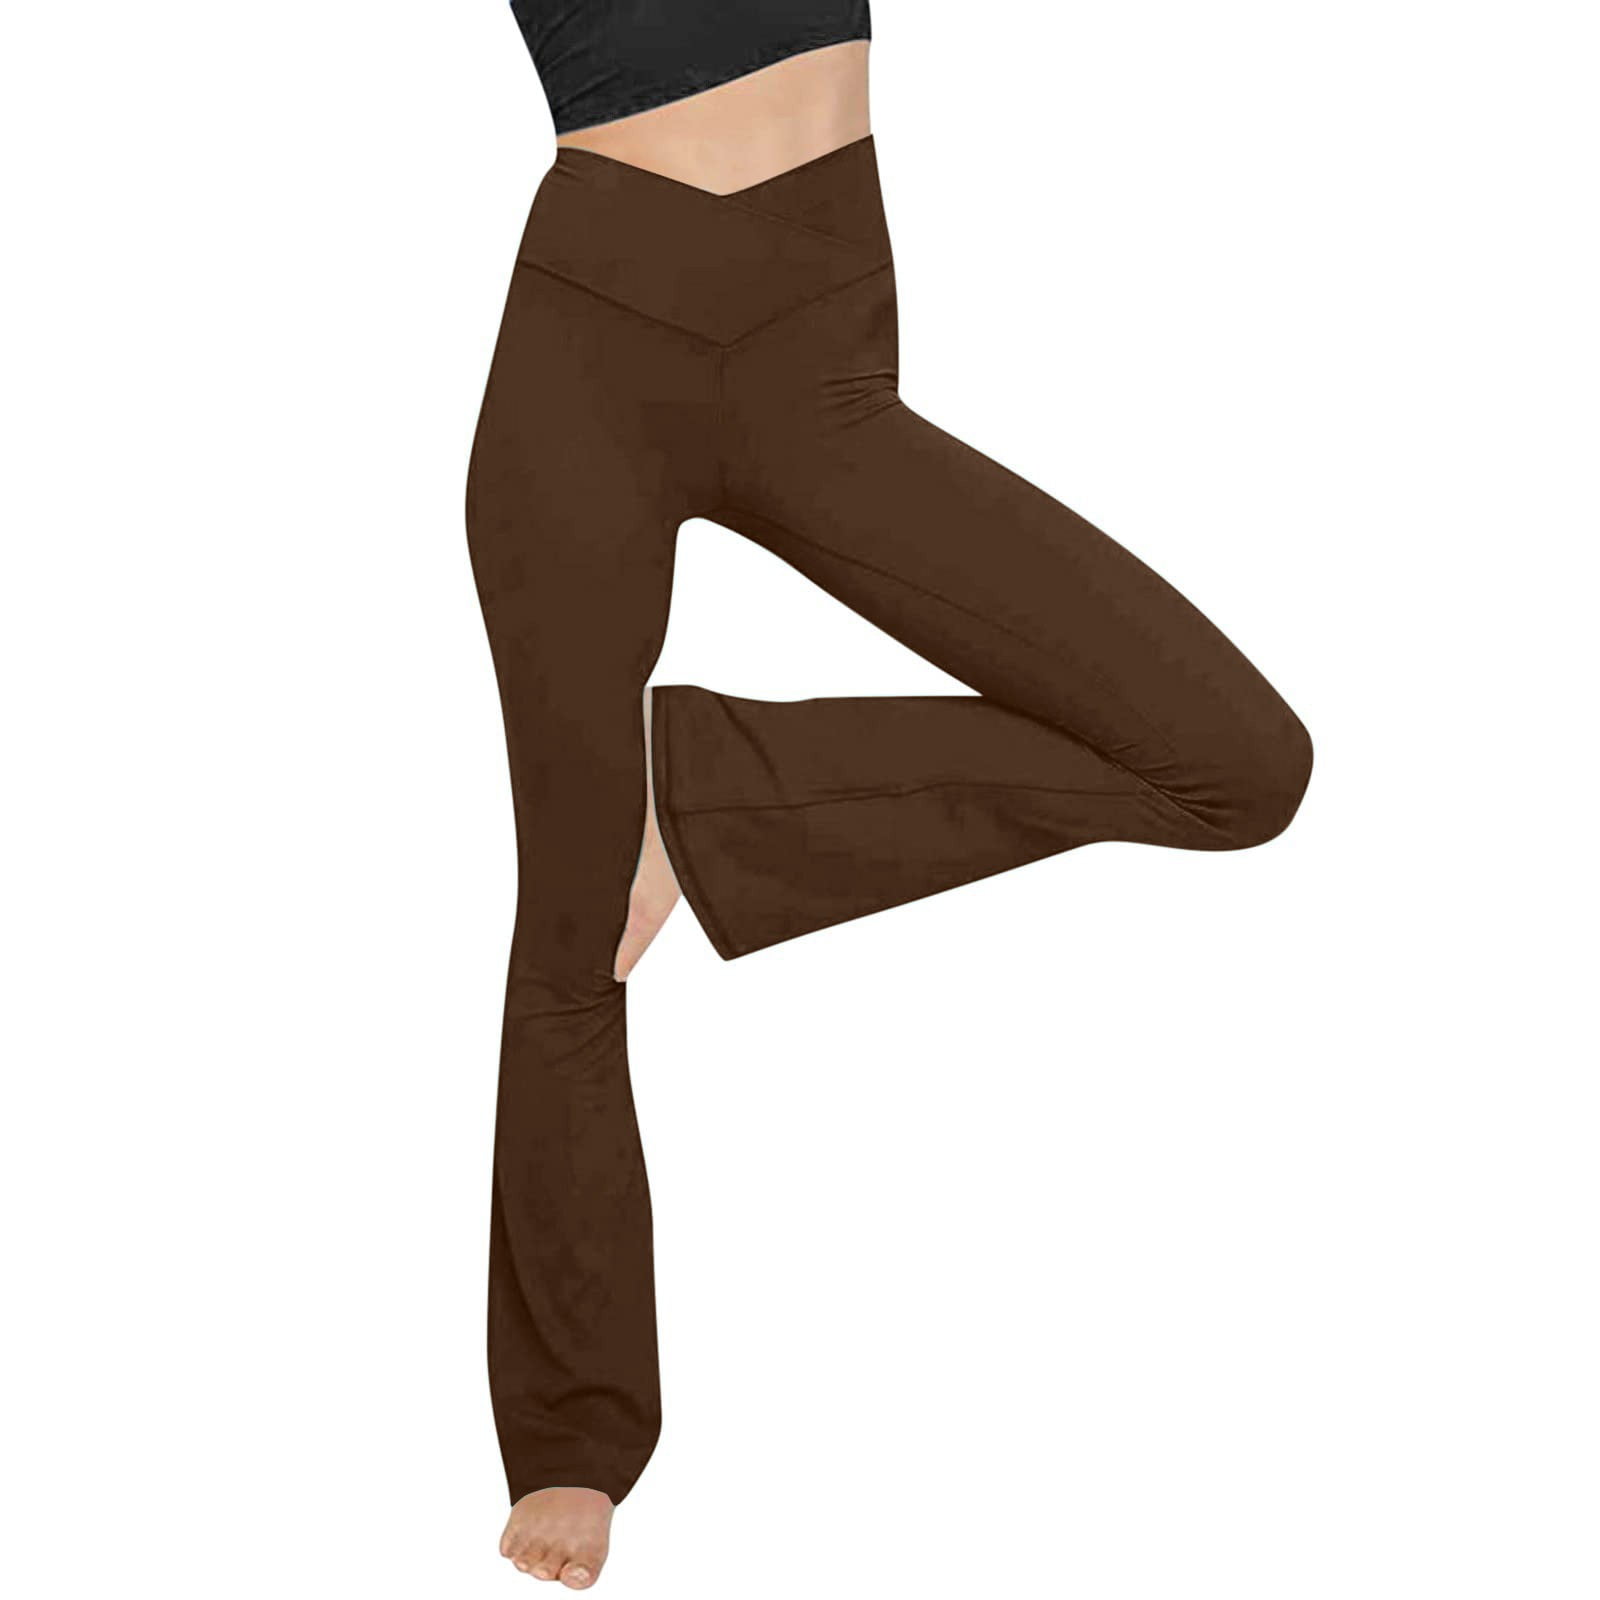 Yoga and Stretching  Forbidden Pants 